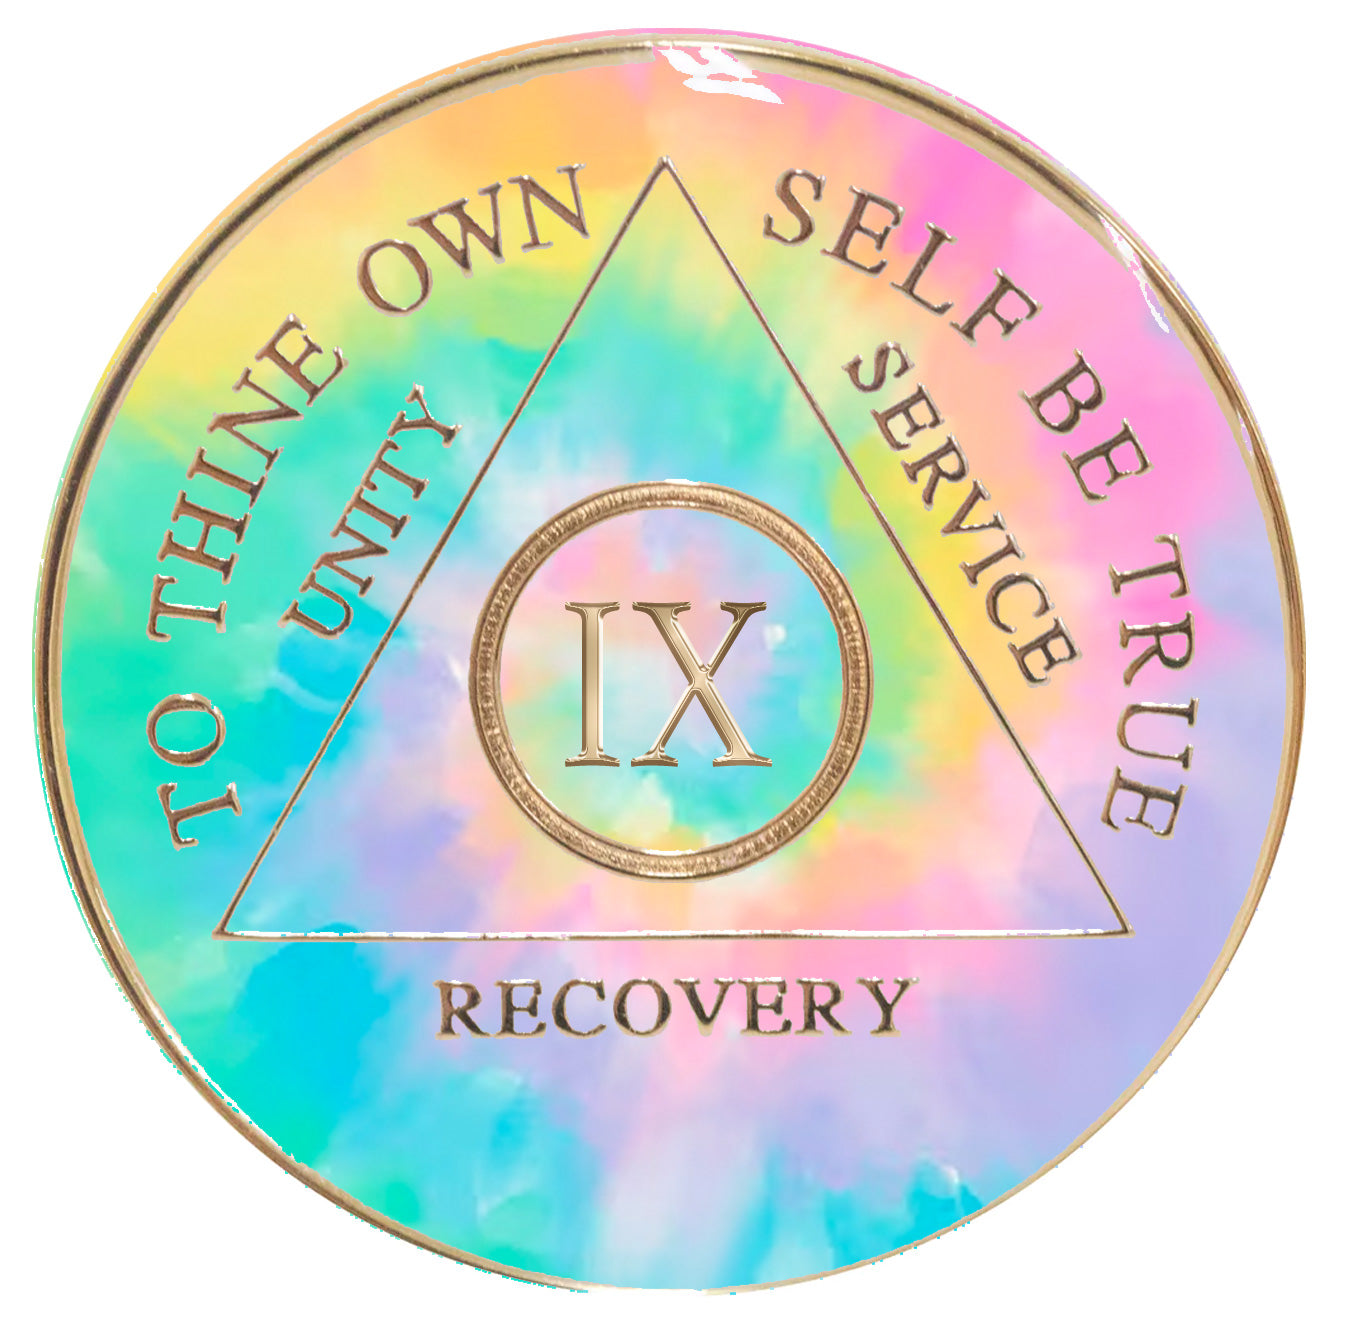 9 year AA psychic-delic change medallion is tie-dye in soft pink, yellow, purple, and blues with the circle, triangle, roman numeral, unity, service, recovery, and to thine own self be true embossed in 14k gold, and the tie-dye representing change.